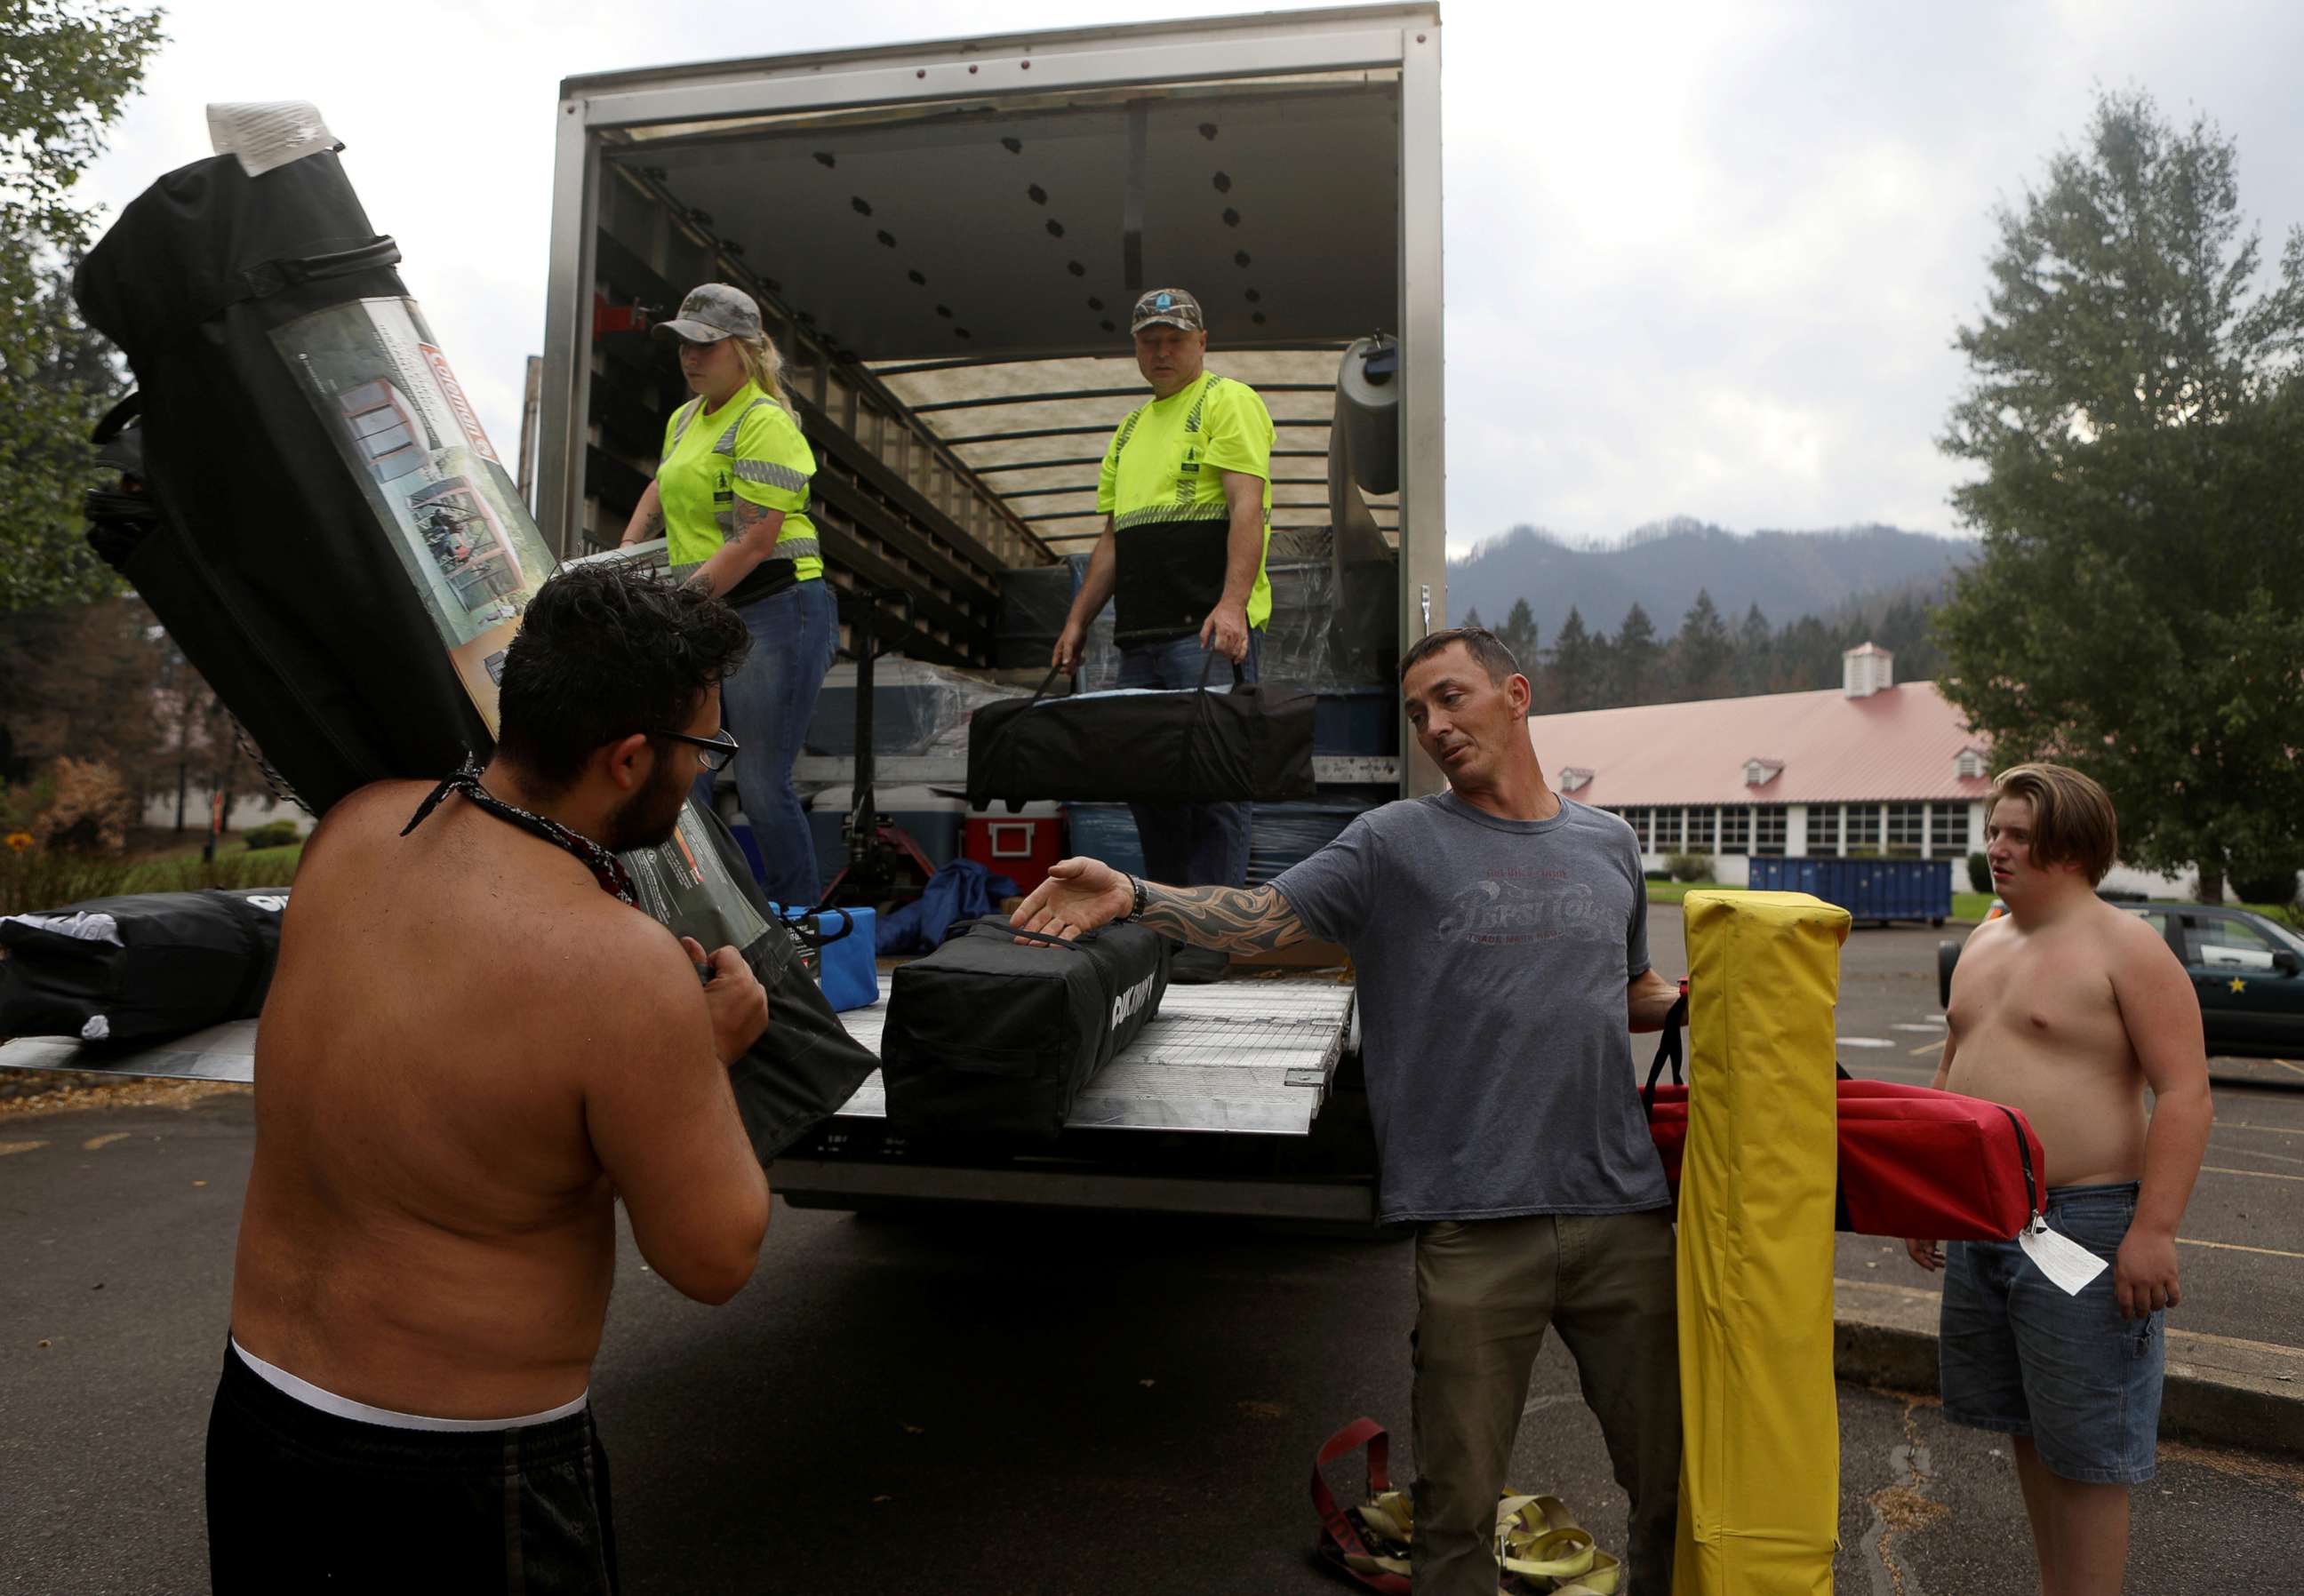 PHOTO: Volunteers and Lane County employees unload supplies for the community after a wildfire came through the area in Blue River, Ore., Sept. 23, 2020.